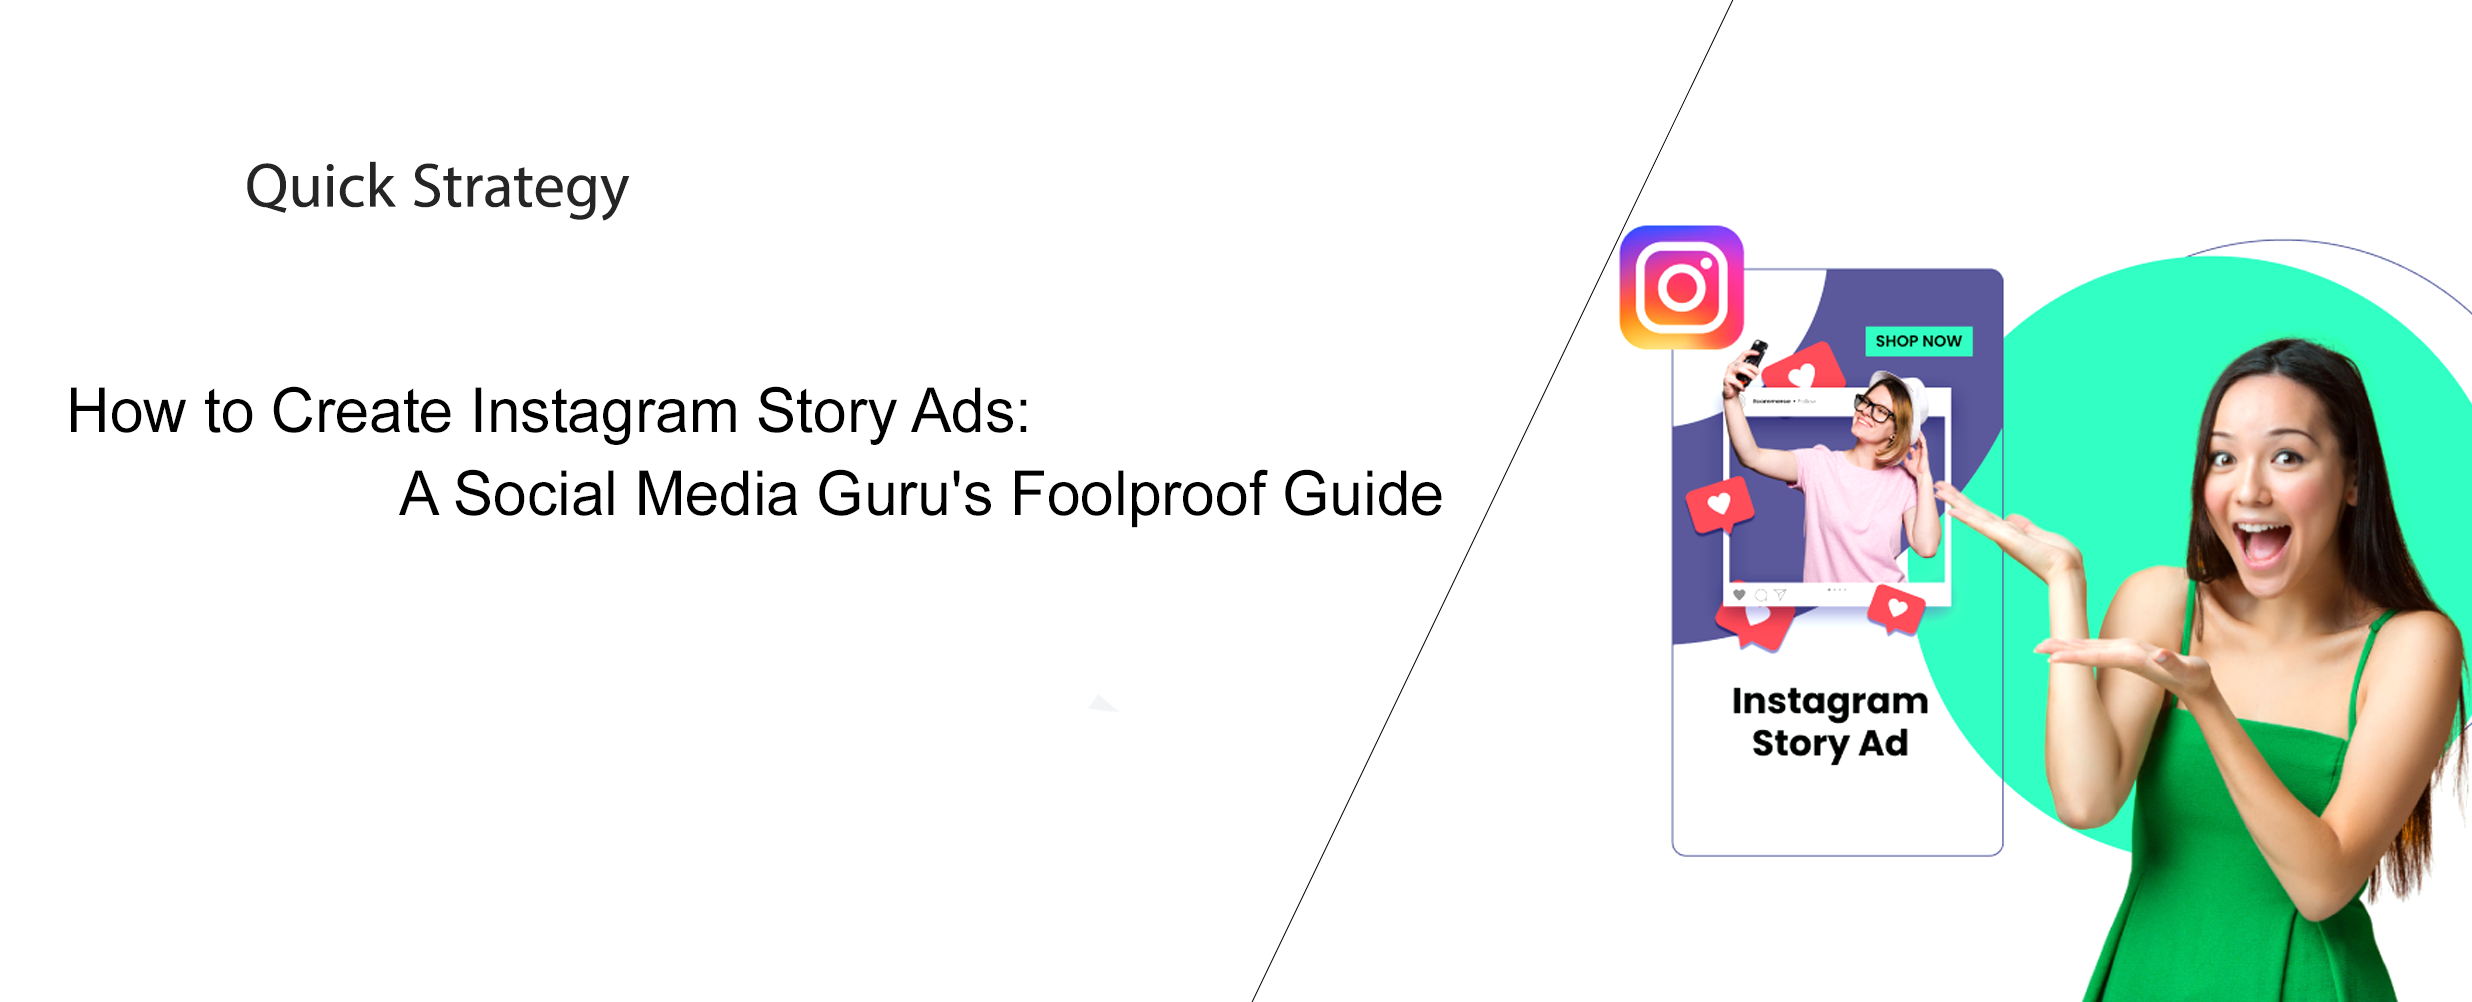 Maximizing Impact: A Social Media Guru's Guide to Creating Compelling Instagram Story Ads